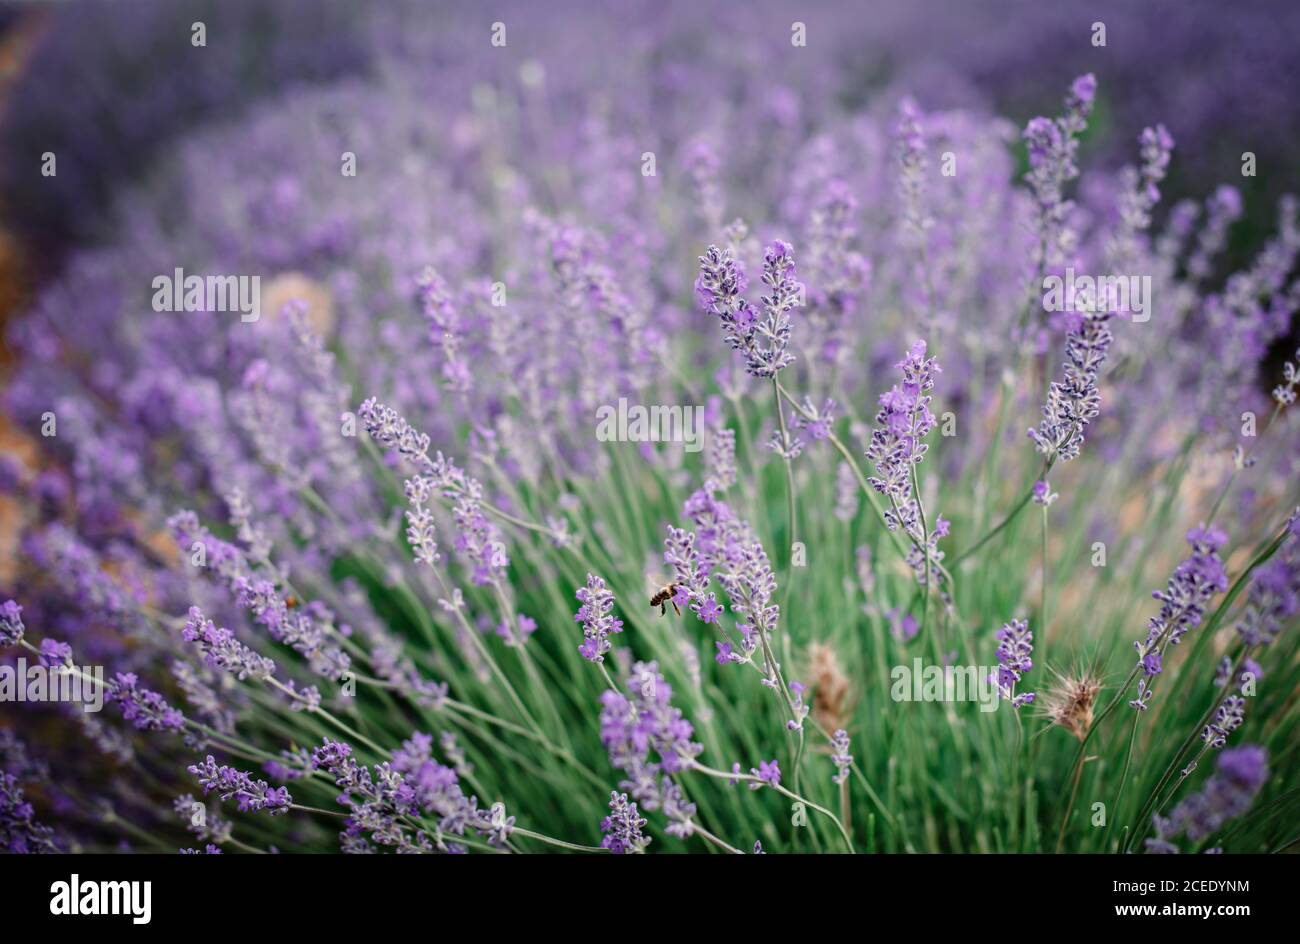 Bush with violet flowers in field Stock Photo